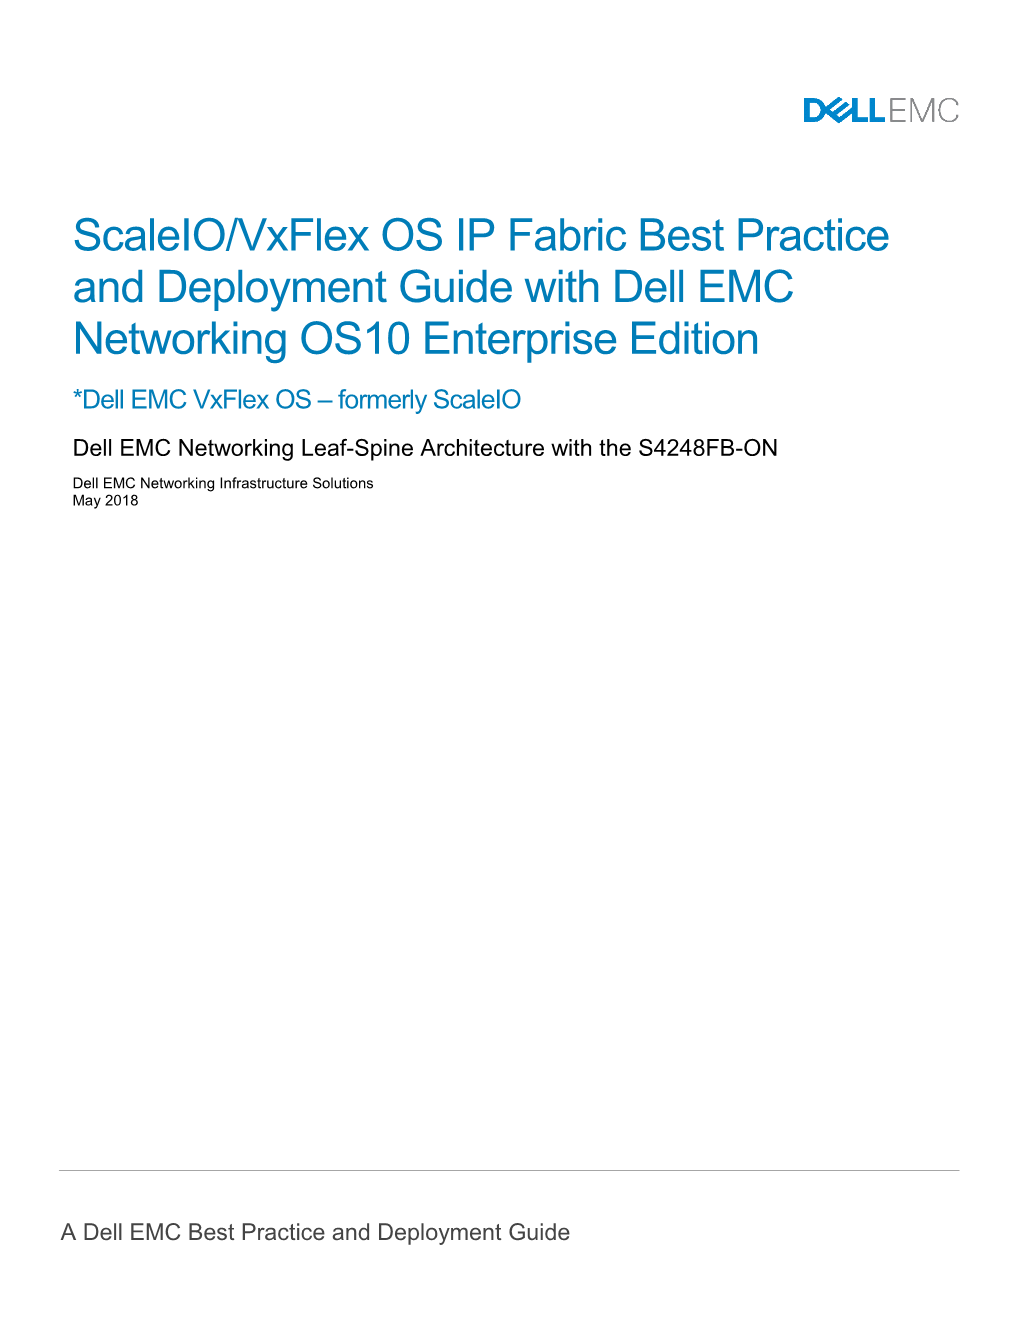 Scaleio Vxflex OS IP Fabric Best Practice and Deployment Guide